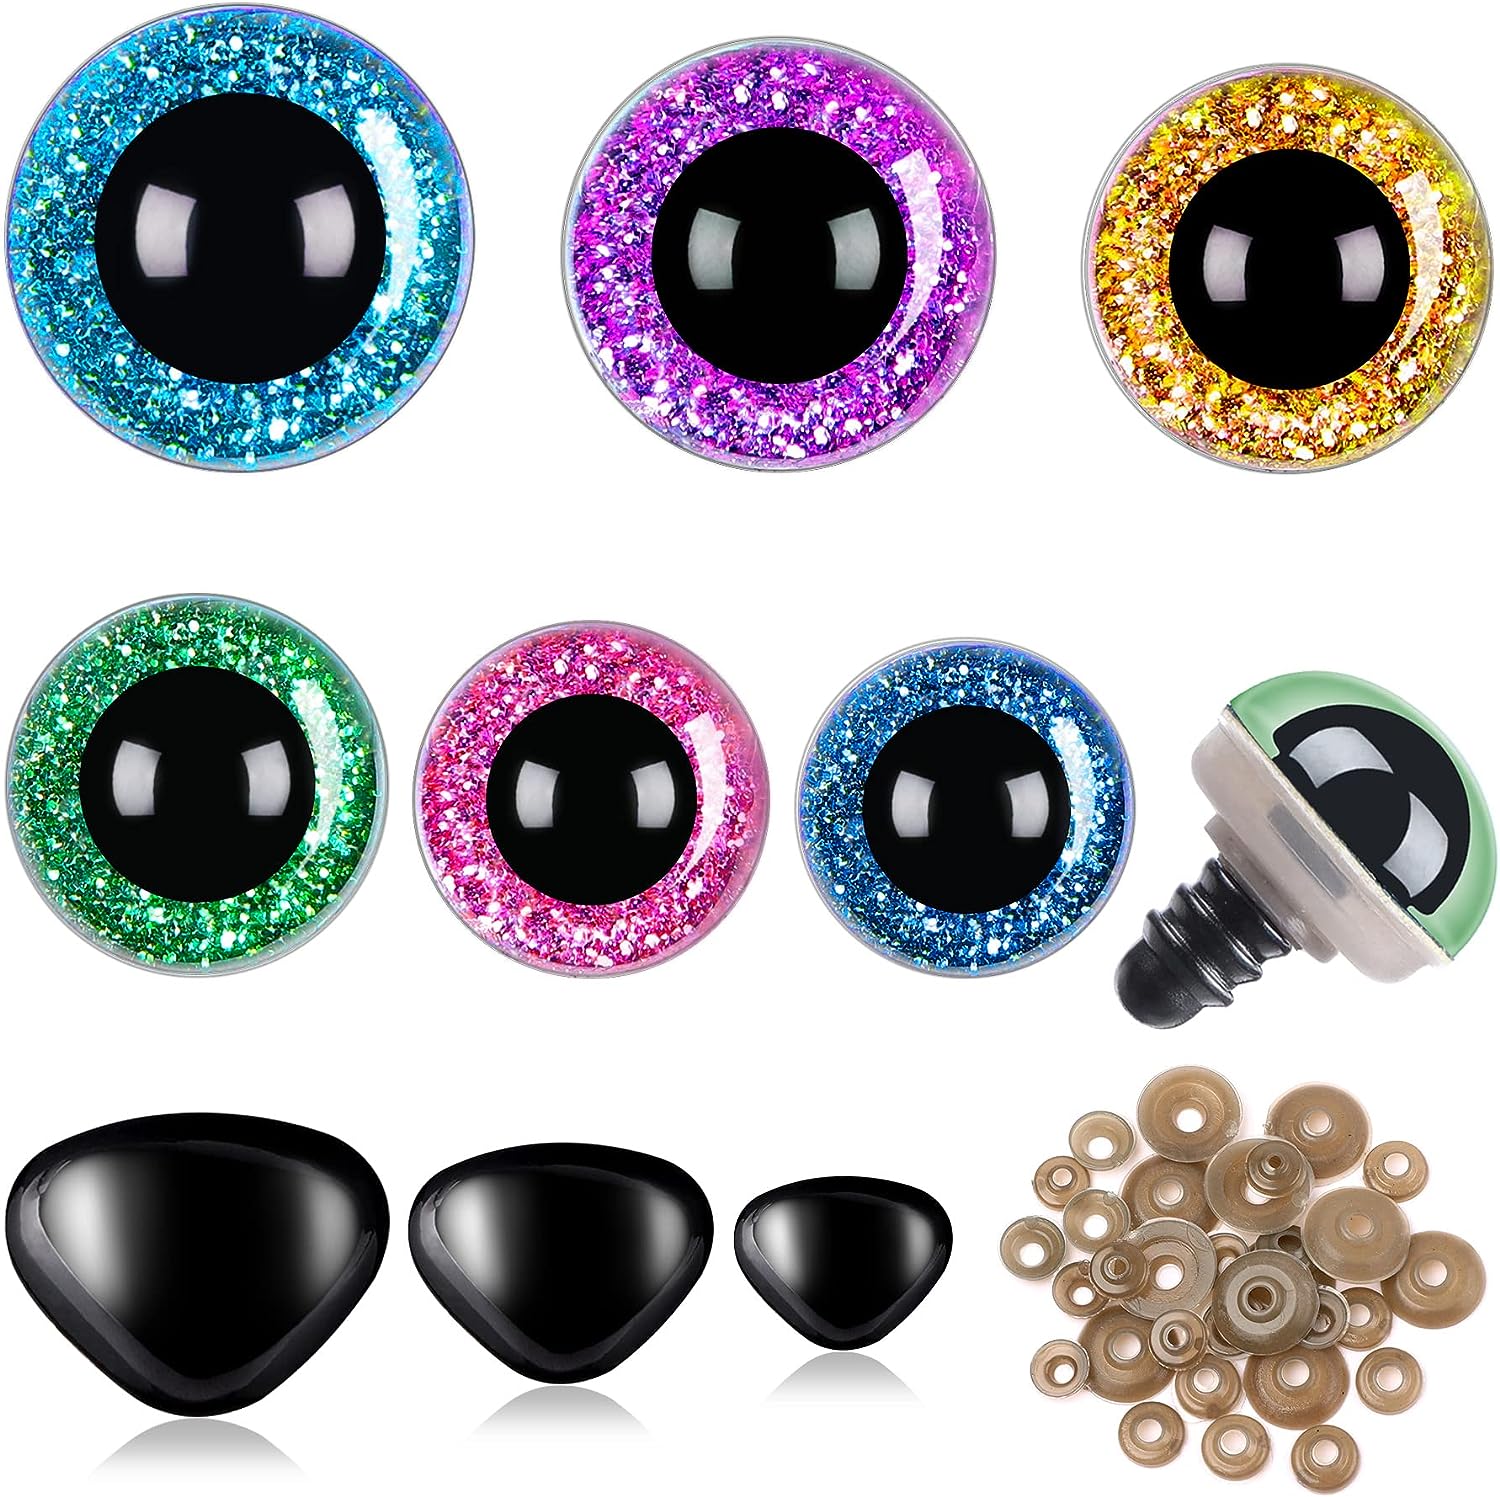 UPINS 500 Pieces 6-12MM Black Plastic Safety Eyes with Washers for Crochet  Animal Crafts Doll Making Supplier Bulk (4 Sizes) A:6-12MM